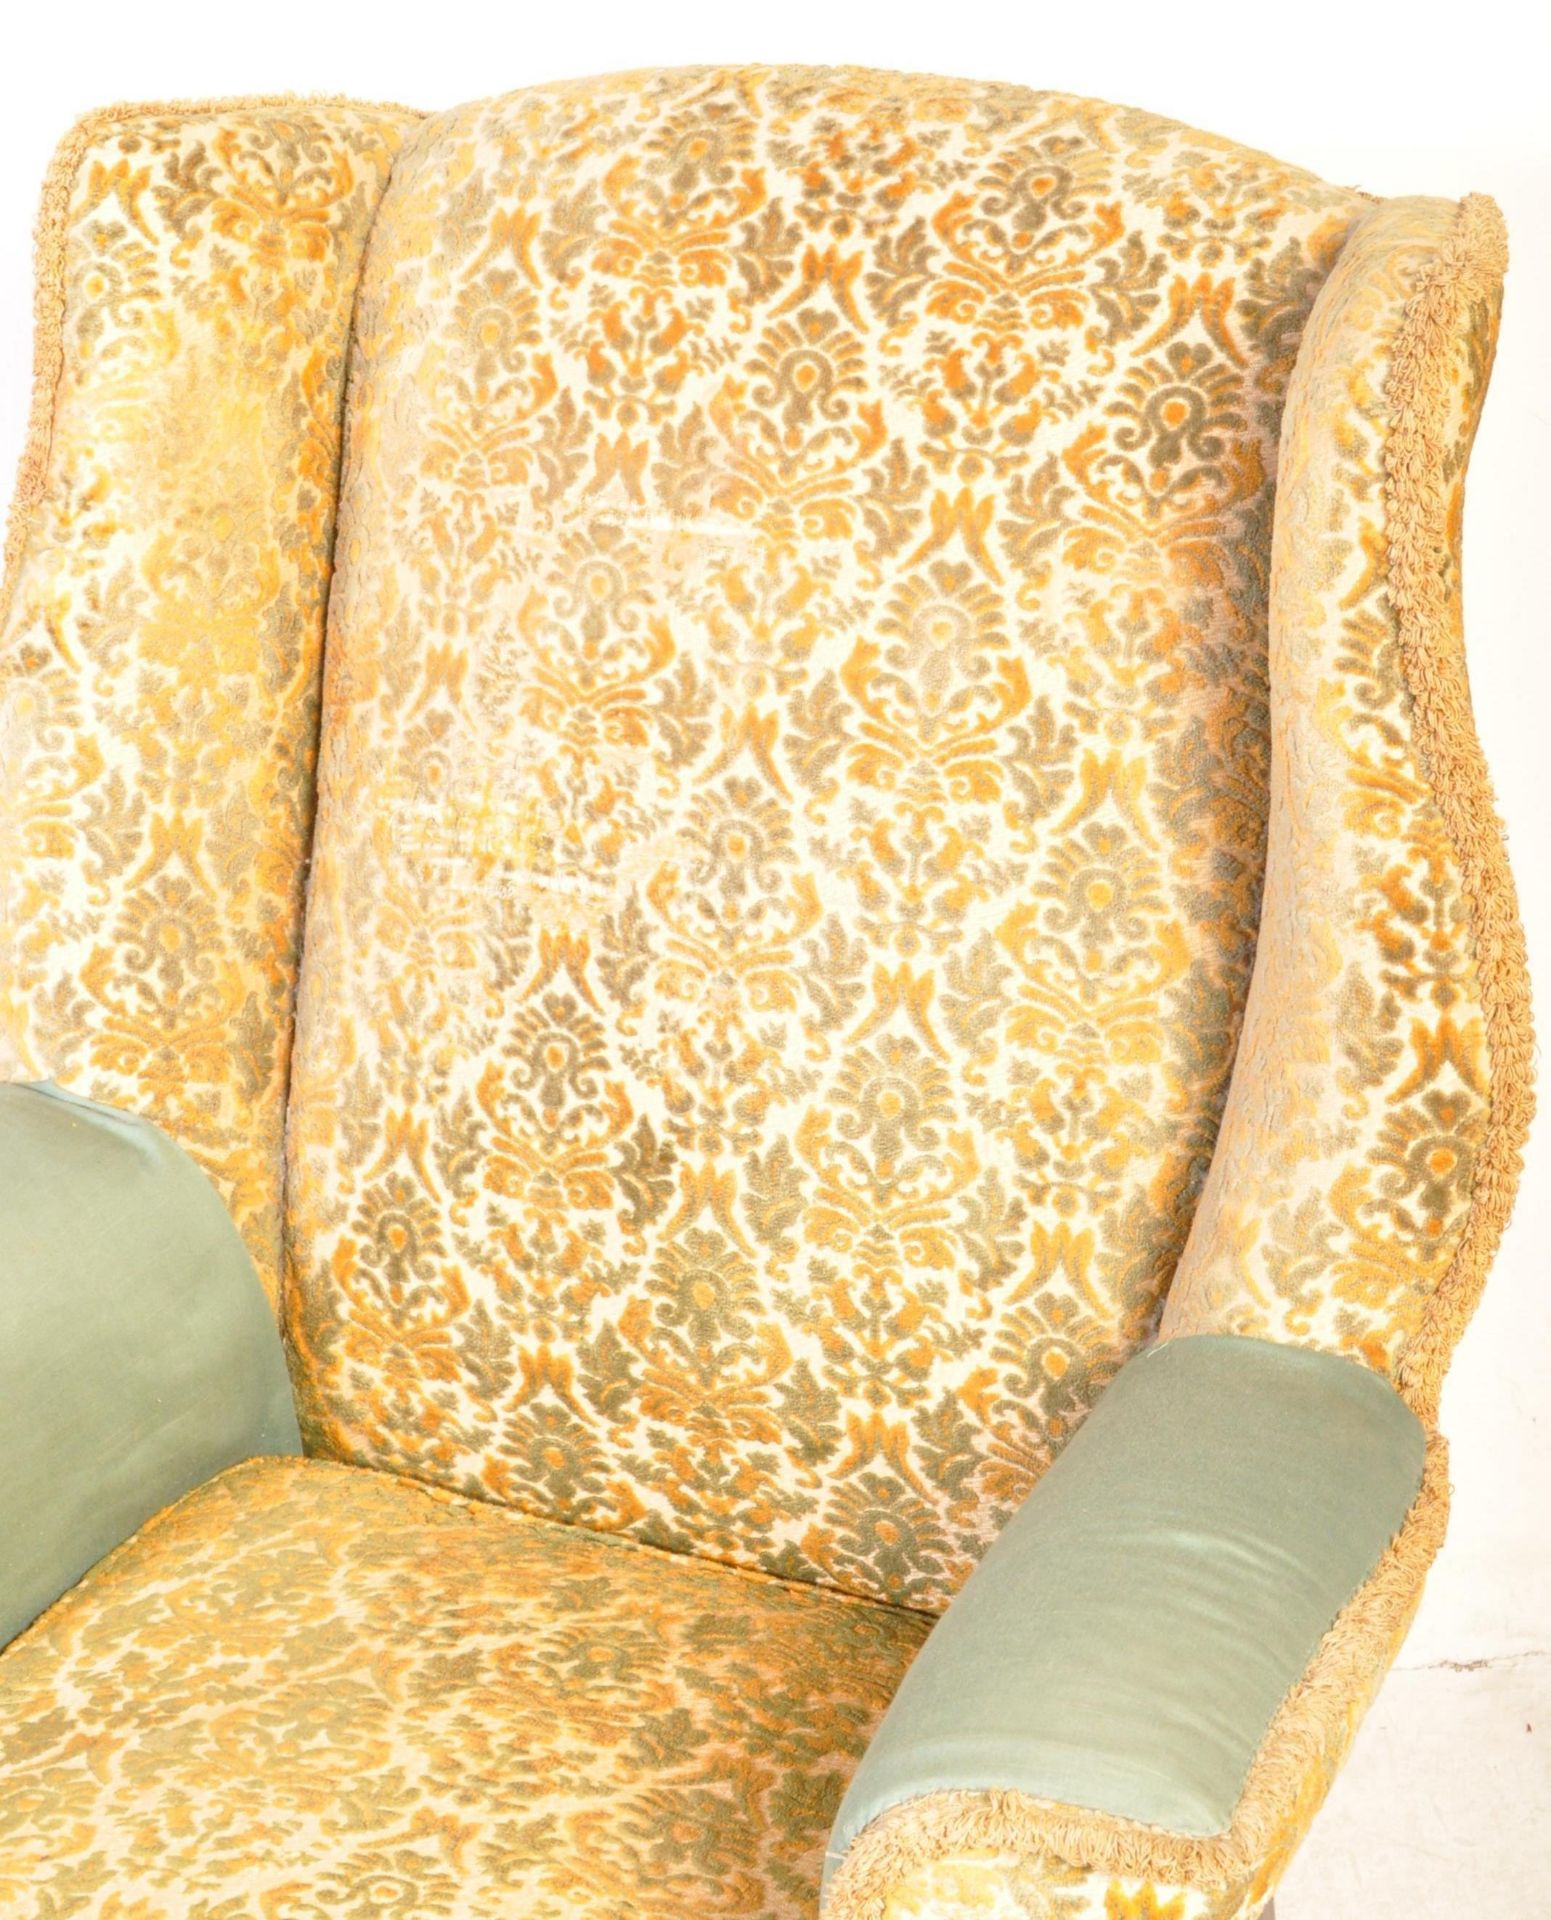 PAIR OF EARLY 20TH CENTURY WING BACK ARMCHAIRS - Image 3 of 6